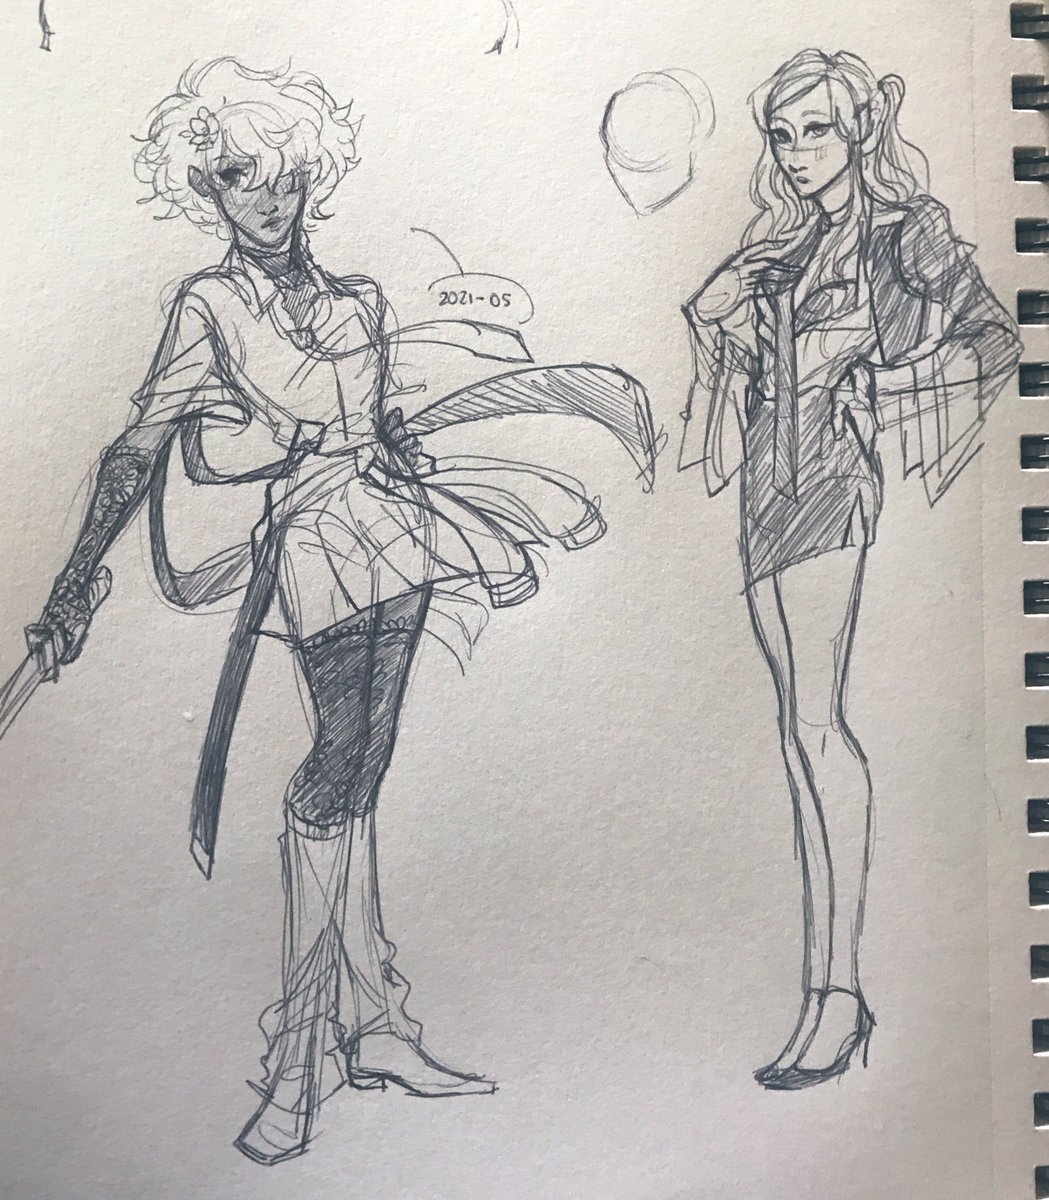 Taking a very small break from comms and played No more heroes with my bestie , 5 min doodles in pen of some faves 